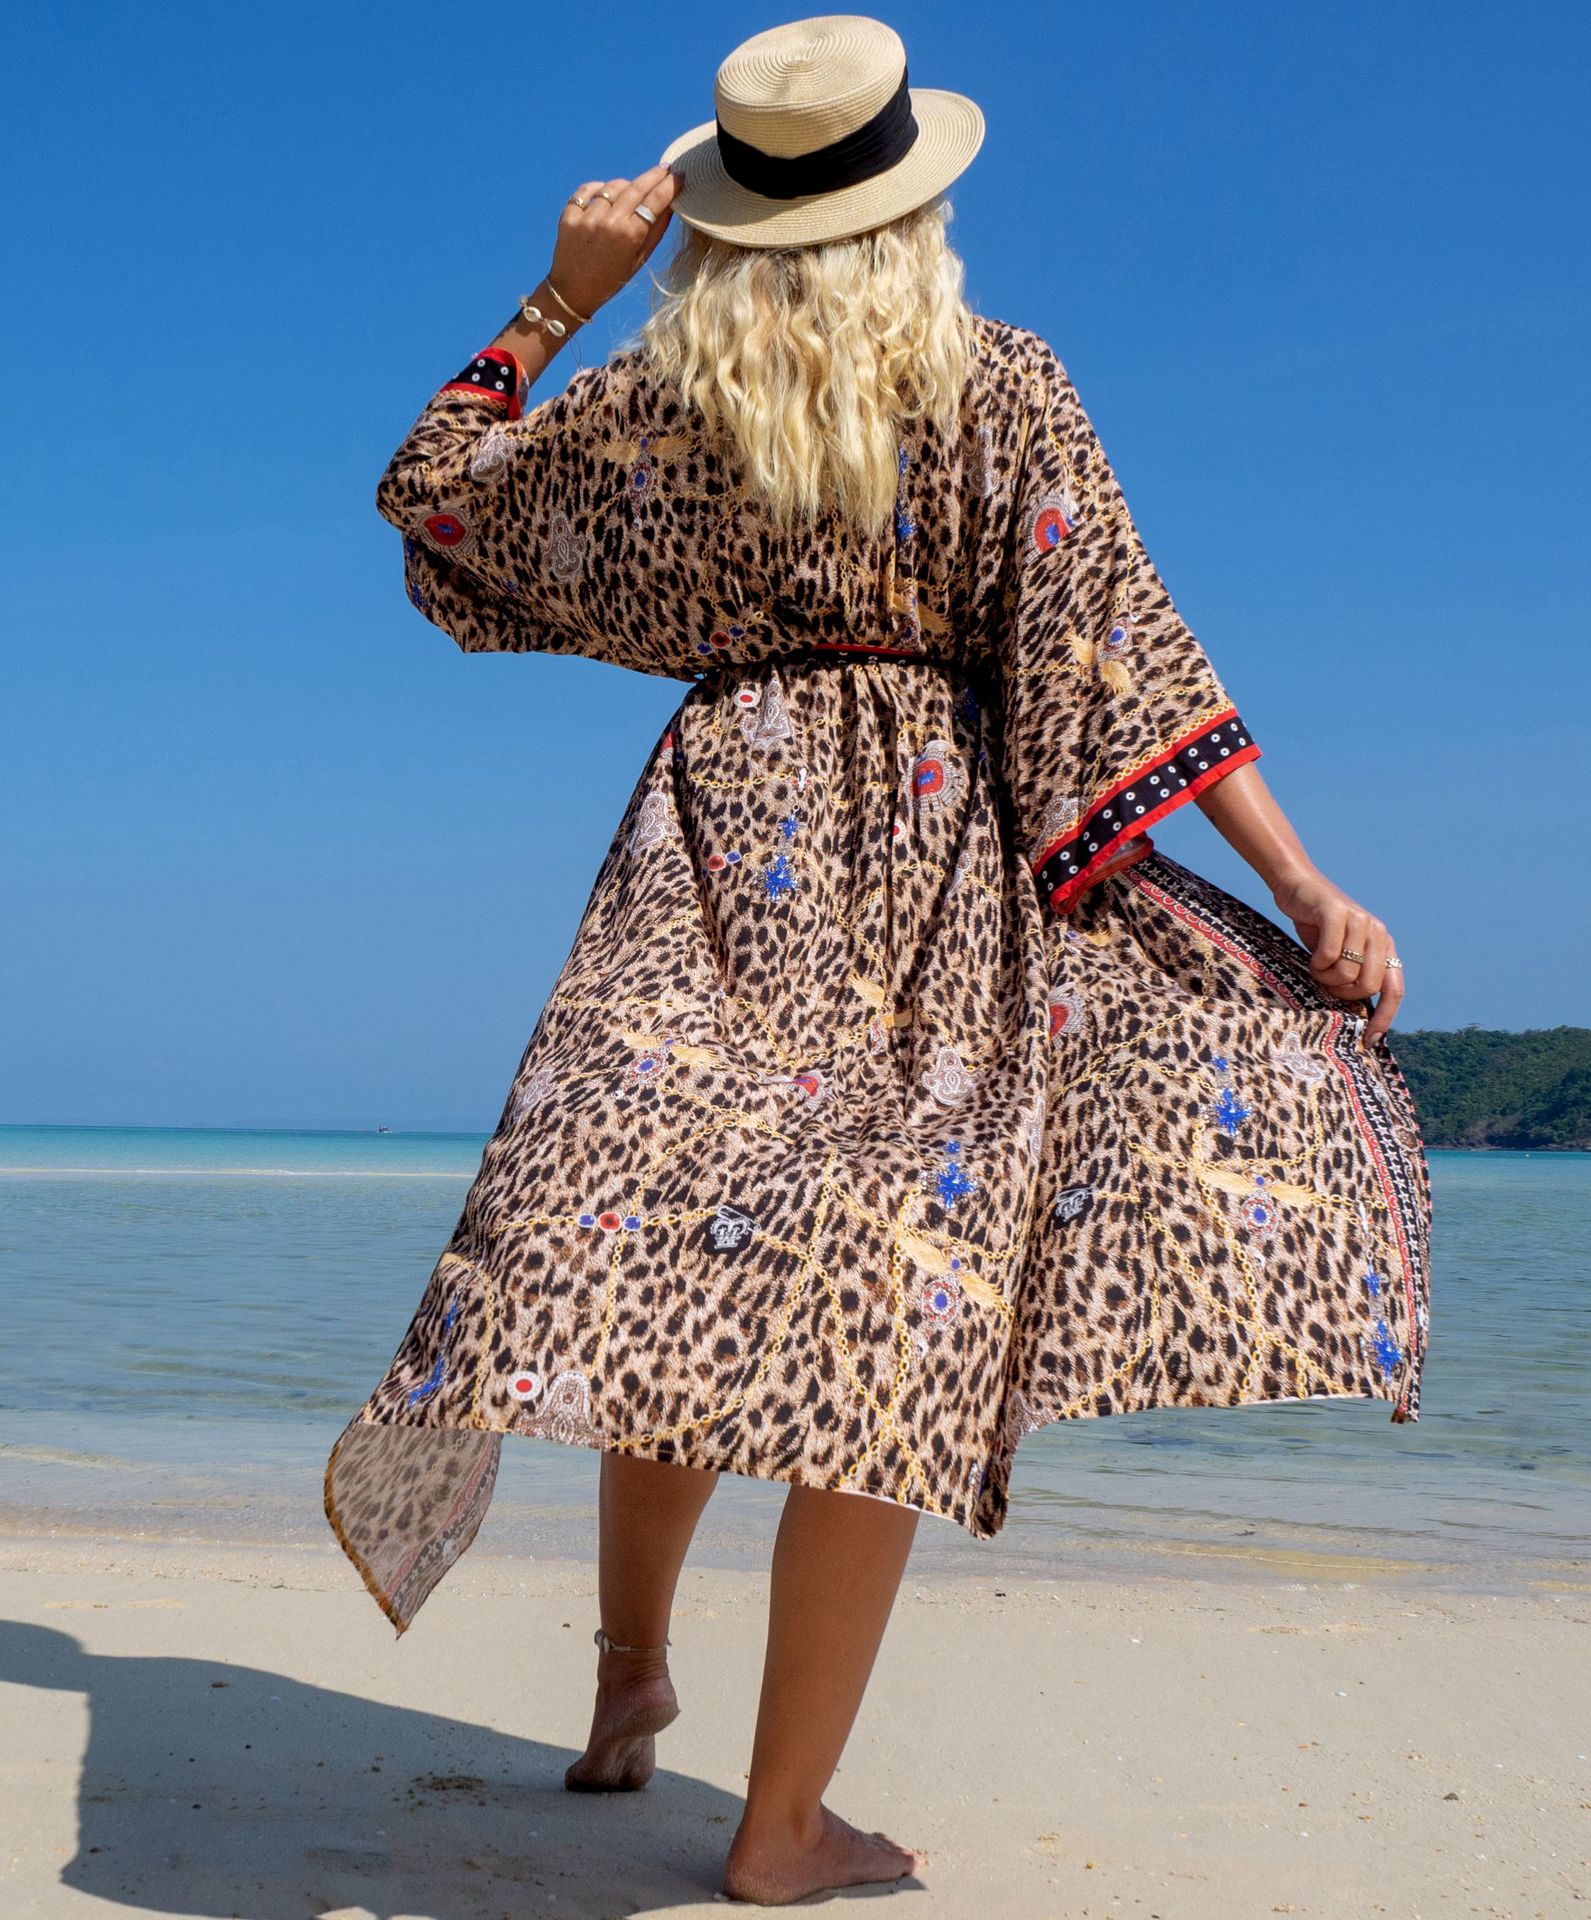 New European And American Rayon Printed Cardigan Beach Skirt Bikini Blouse Swimsuit Outwear Sun Protection Clothing Seaside Vacation Skirt display picture 109